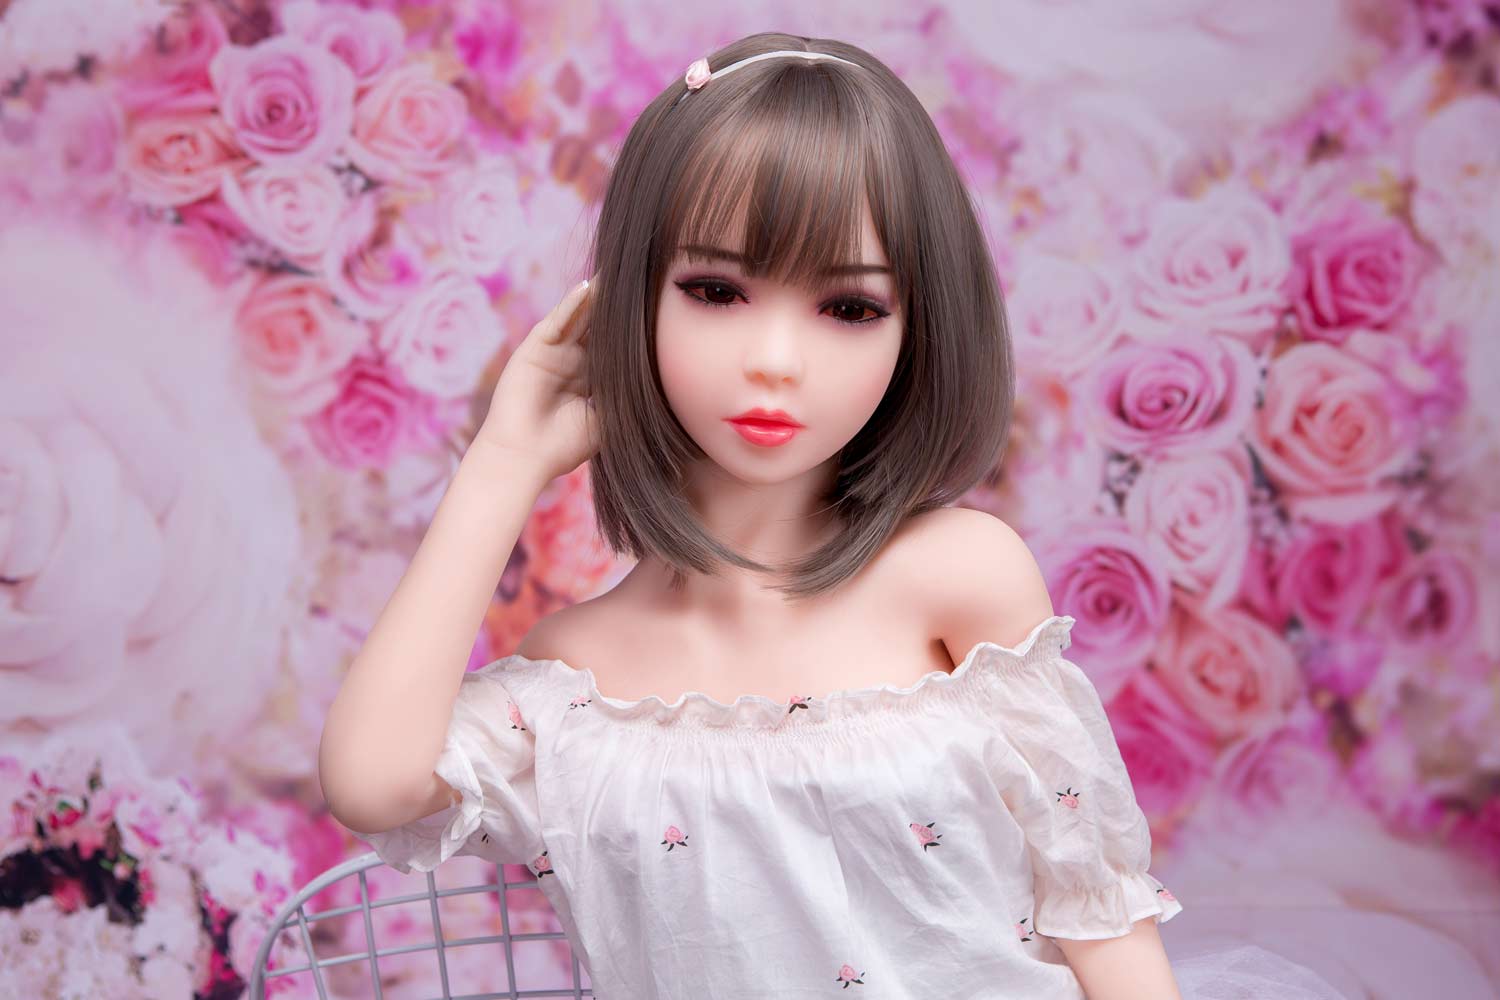 Mini sex doll with a loud voice